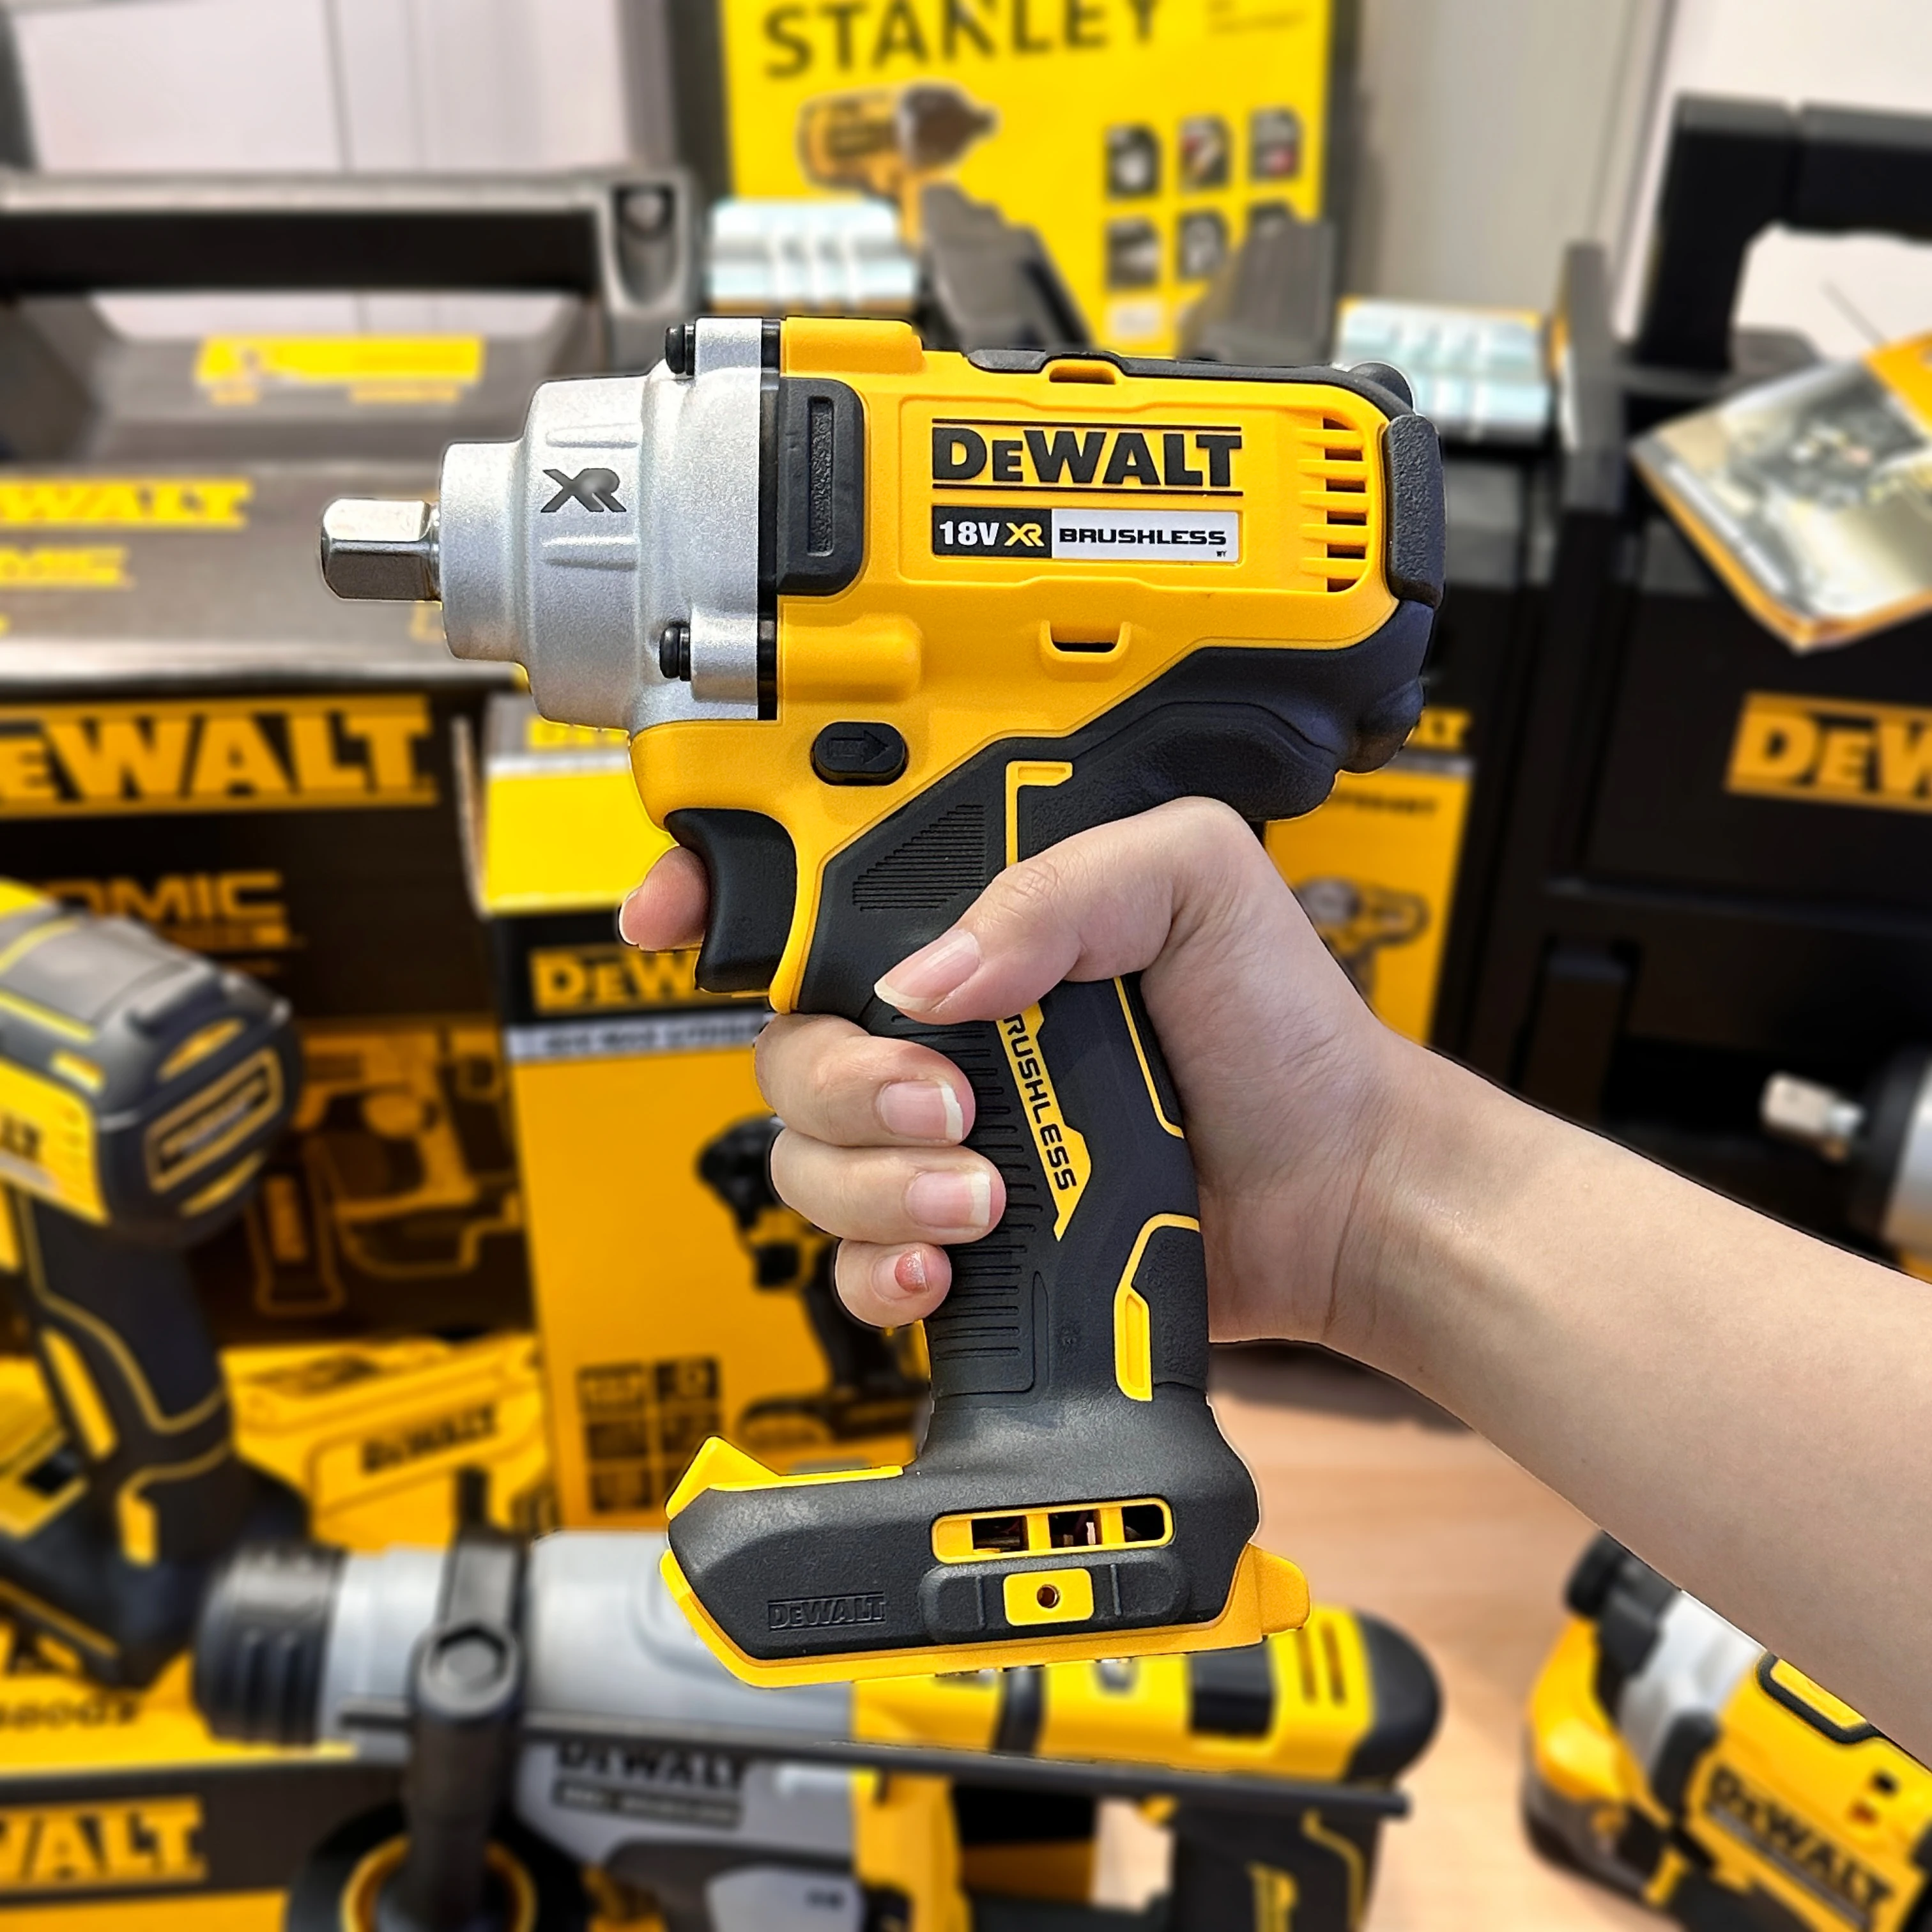 DEWALT Impact Wrench DCF894 18V Brushless Cordless Electric Wrench 1/2in  High Torque 447NM Rechargeable Car Disassembly Tools